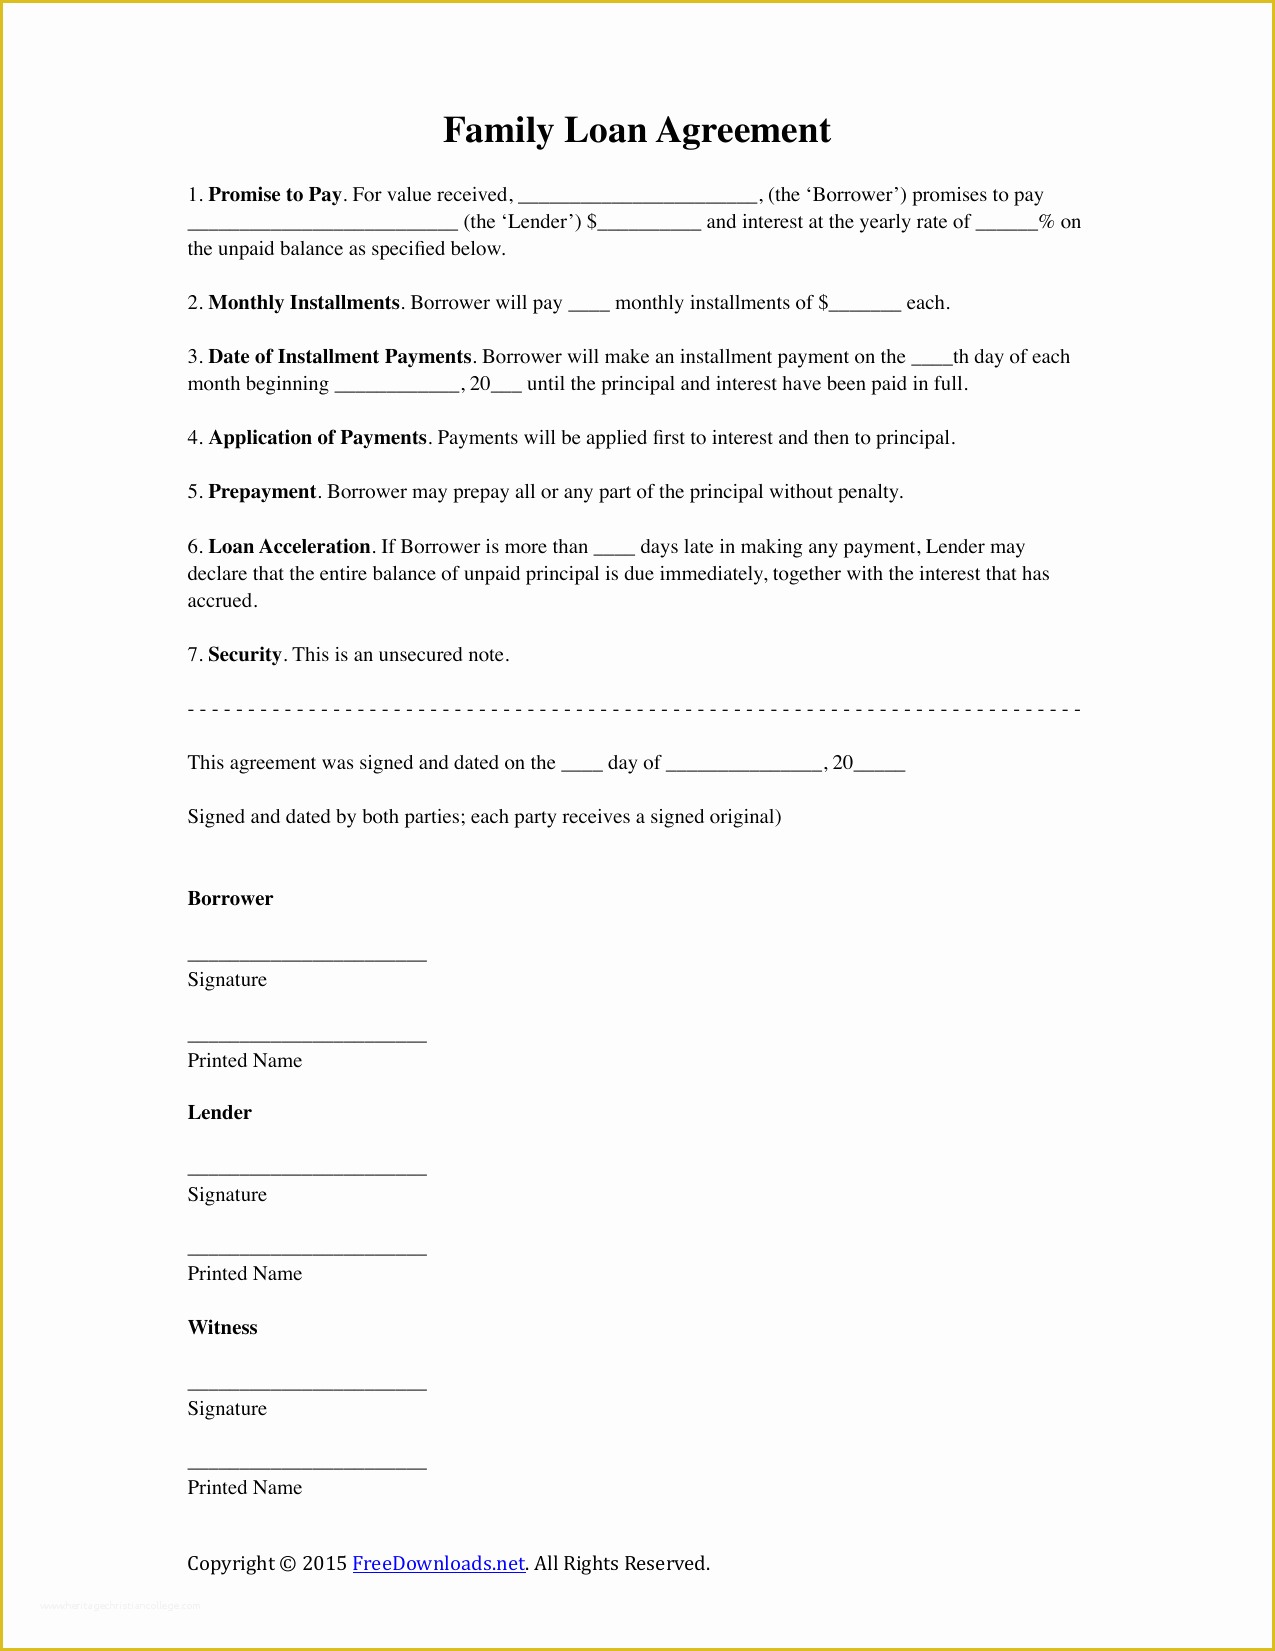 Family Loan Agreement Template Free Of Download Family Loan Agreement Template Pdf Rtf